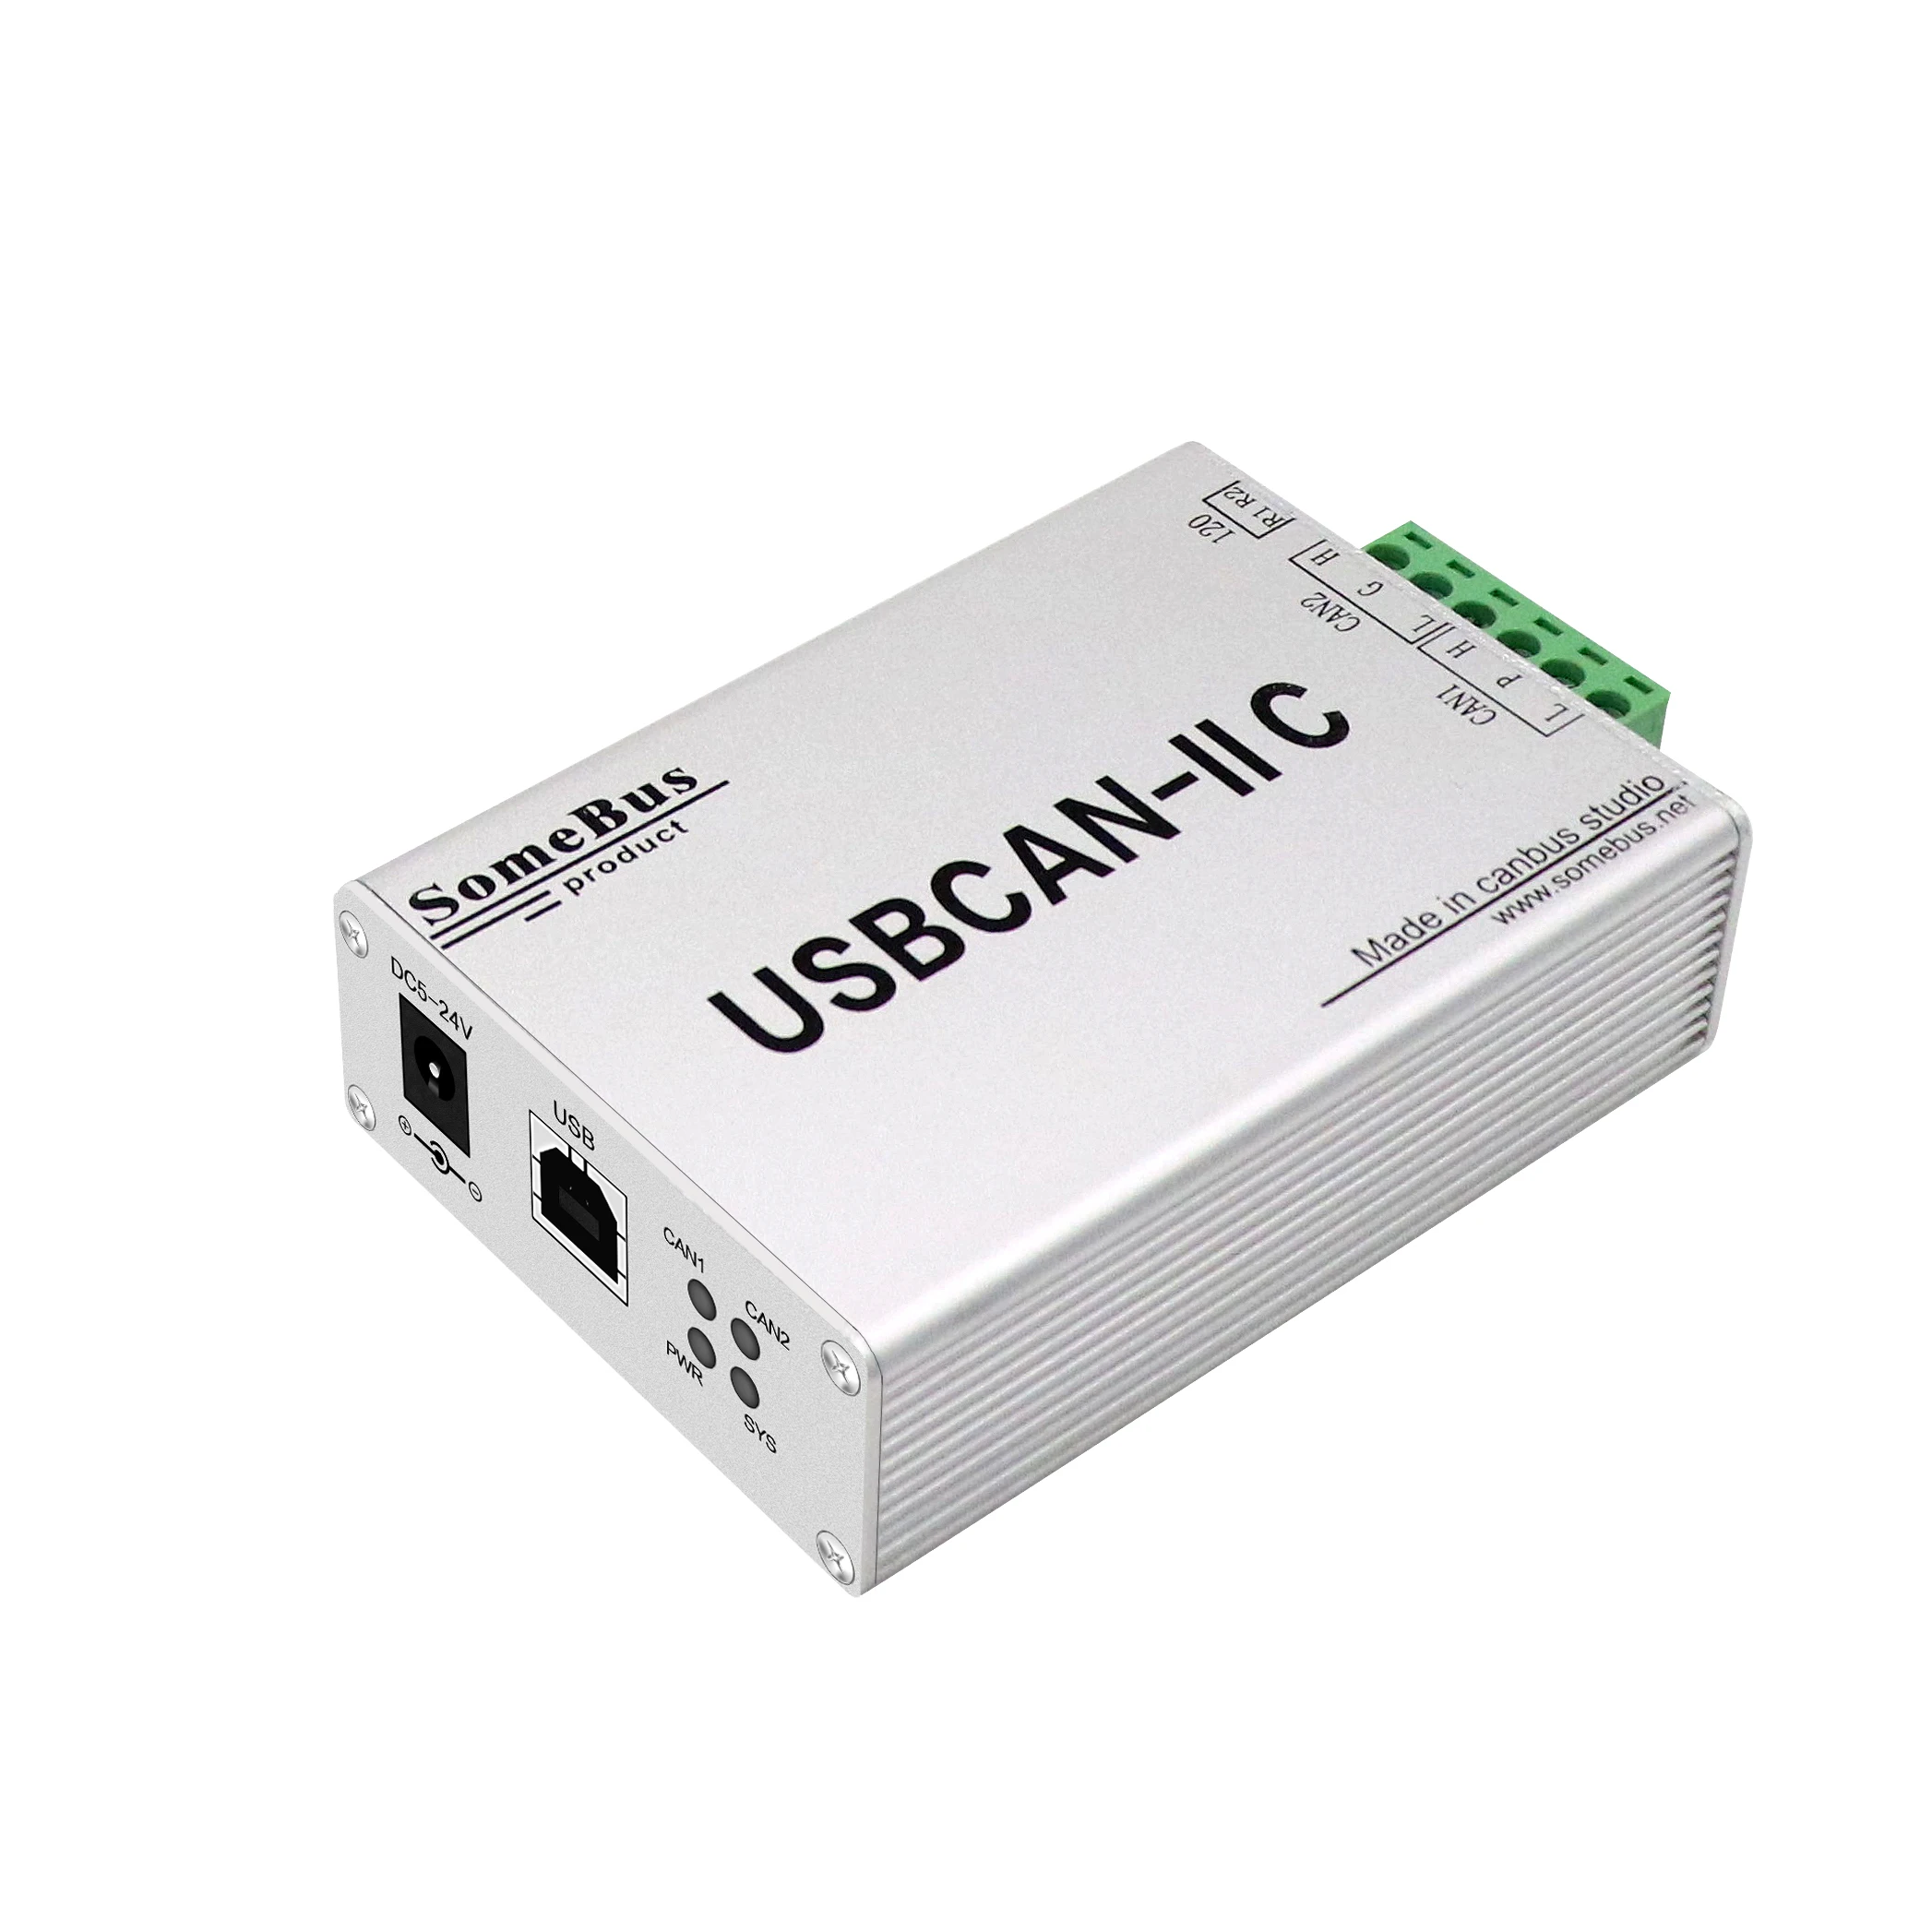 Industrial CAN-bus Communication Interface Card for Automotive Electronics Applications